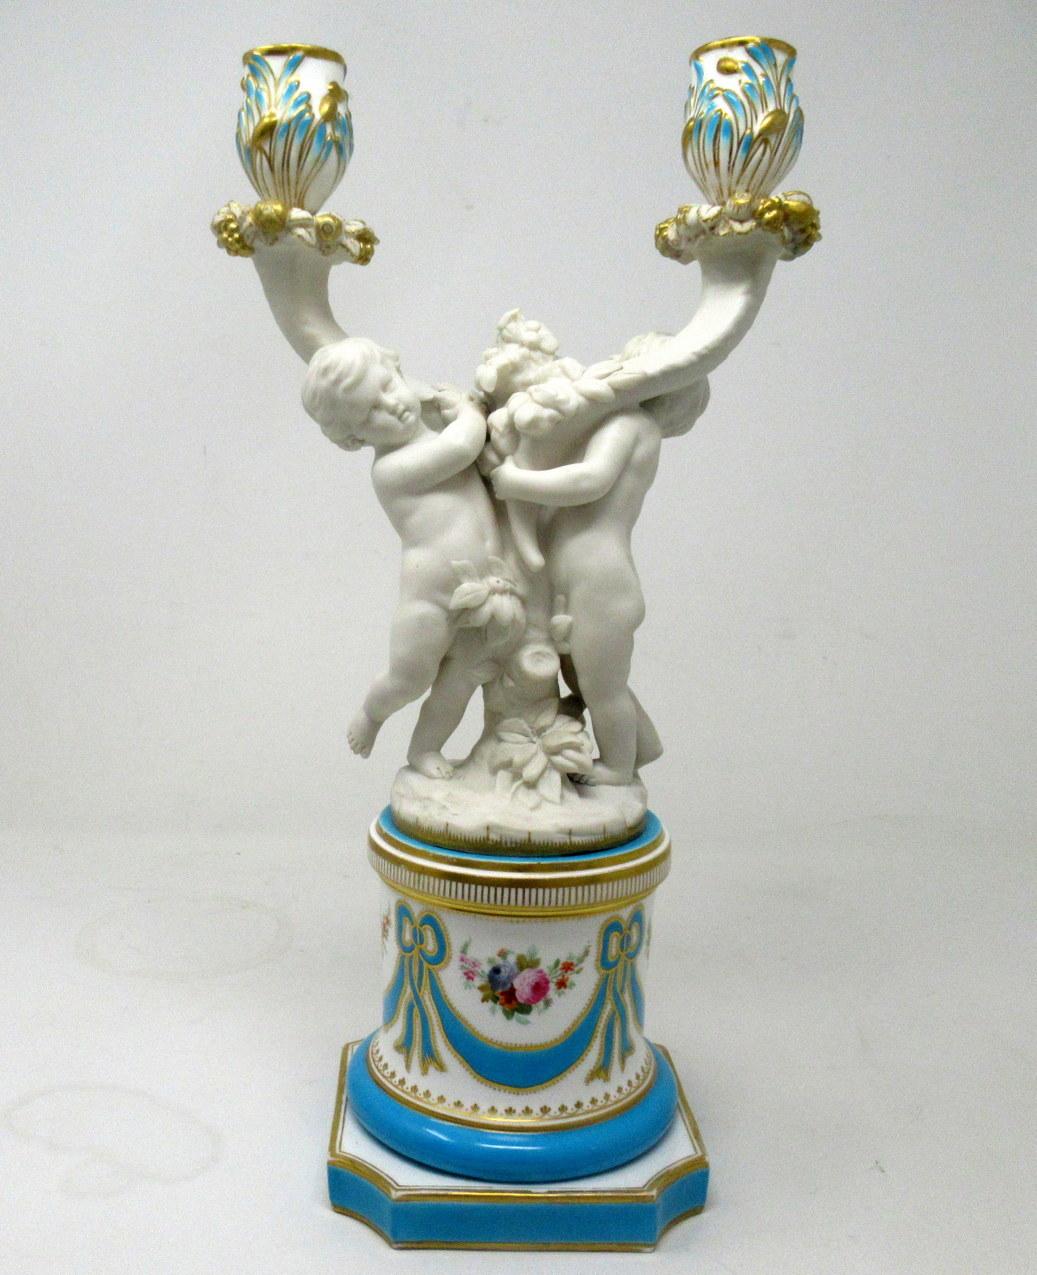 Stunning Example of an English Minton Porcelain two branch candelabra, modelled as a group of Cherubs standing on naturalistic base above an elaborate reeded socle with lavish decoration depicting gilt framed medallions with hand paintings of still